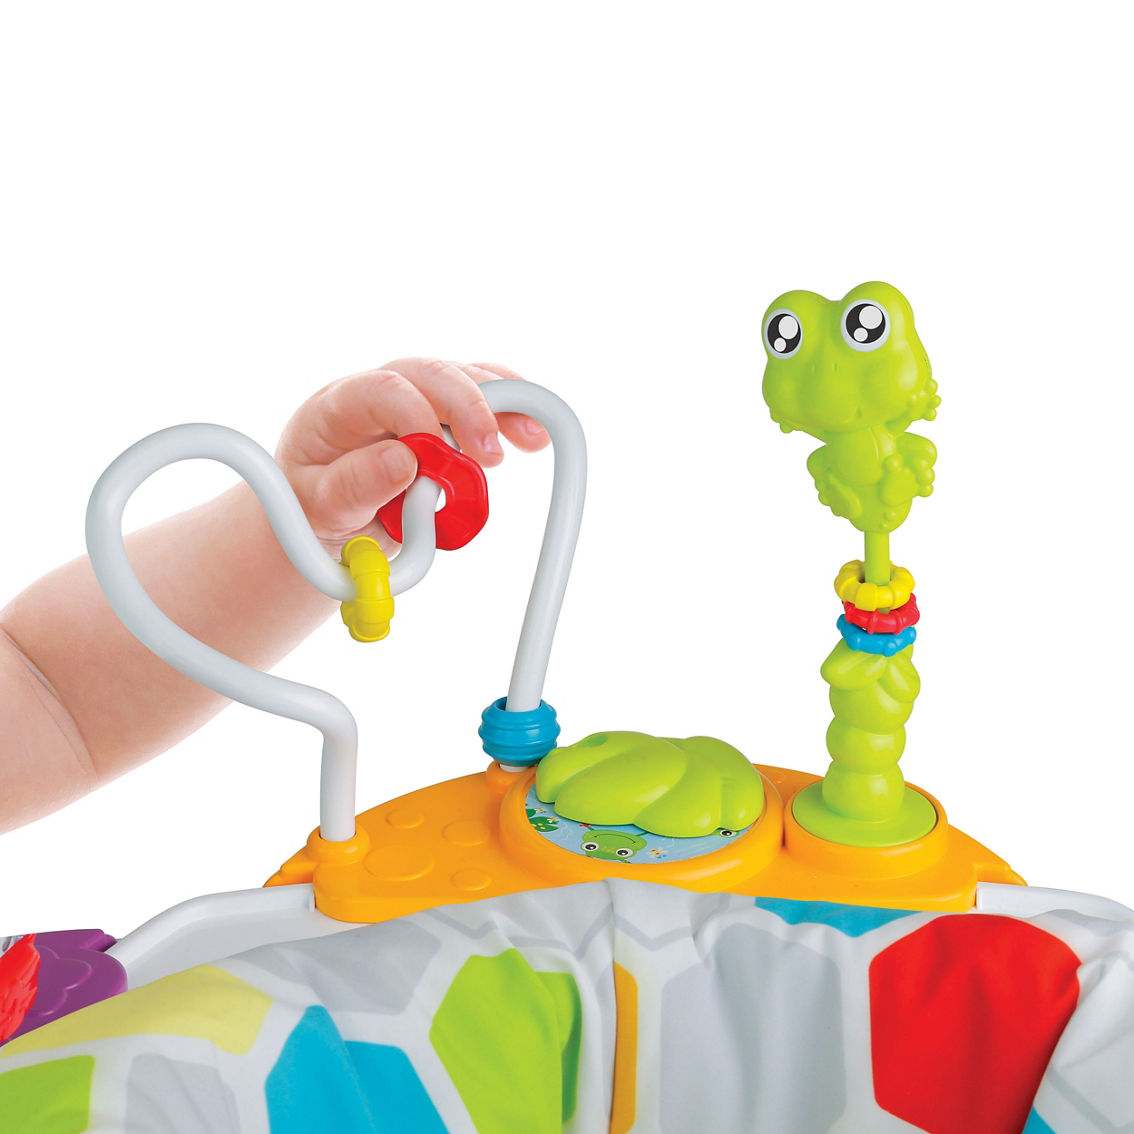 Winfun Baby Move Activity Center - Image 3 of 5